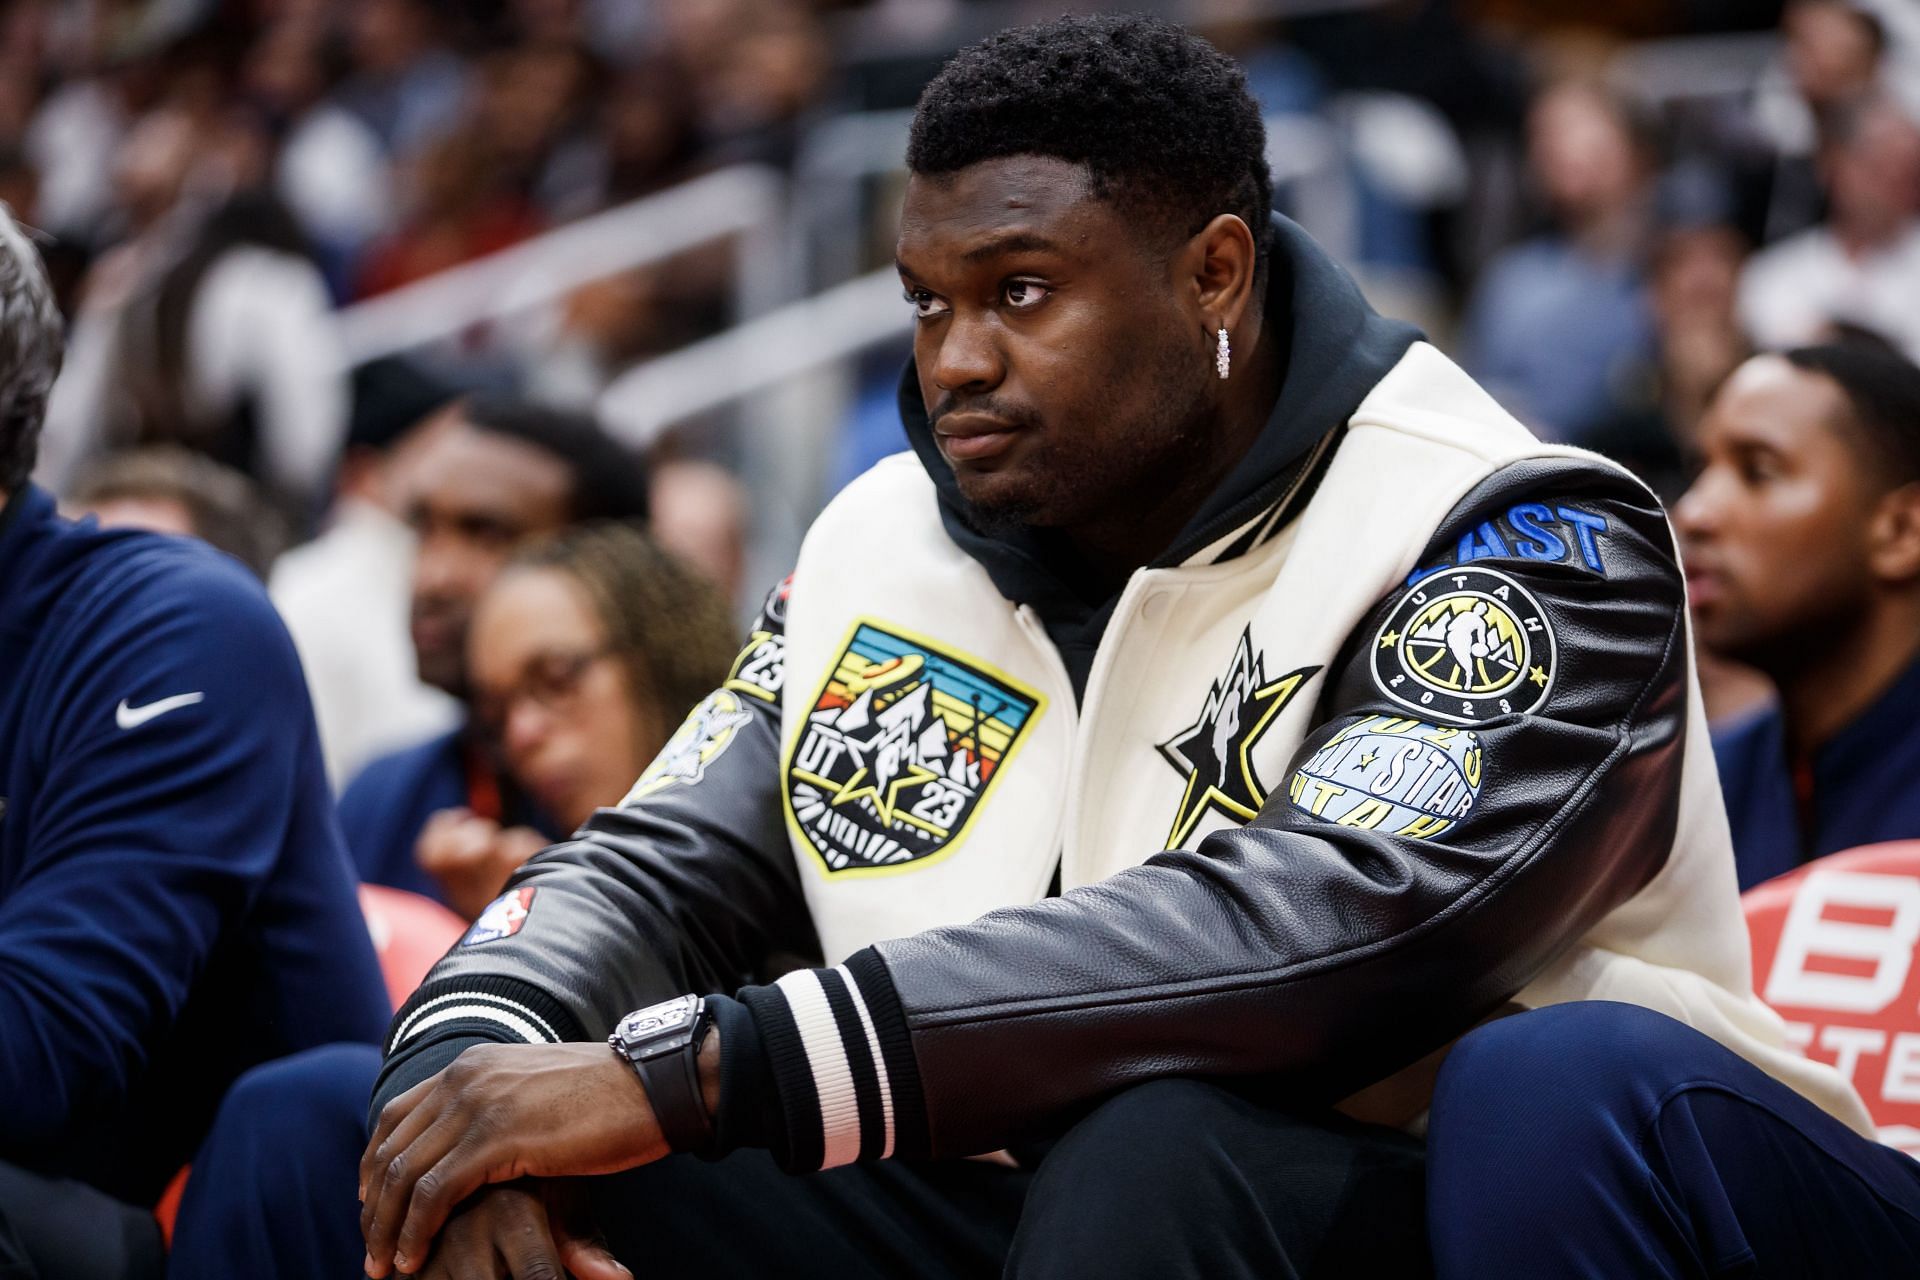 Zion Williamson of the New Orleans Pelicans